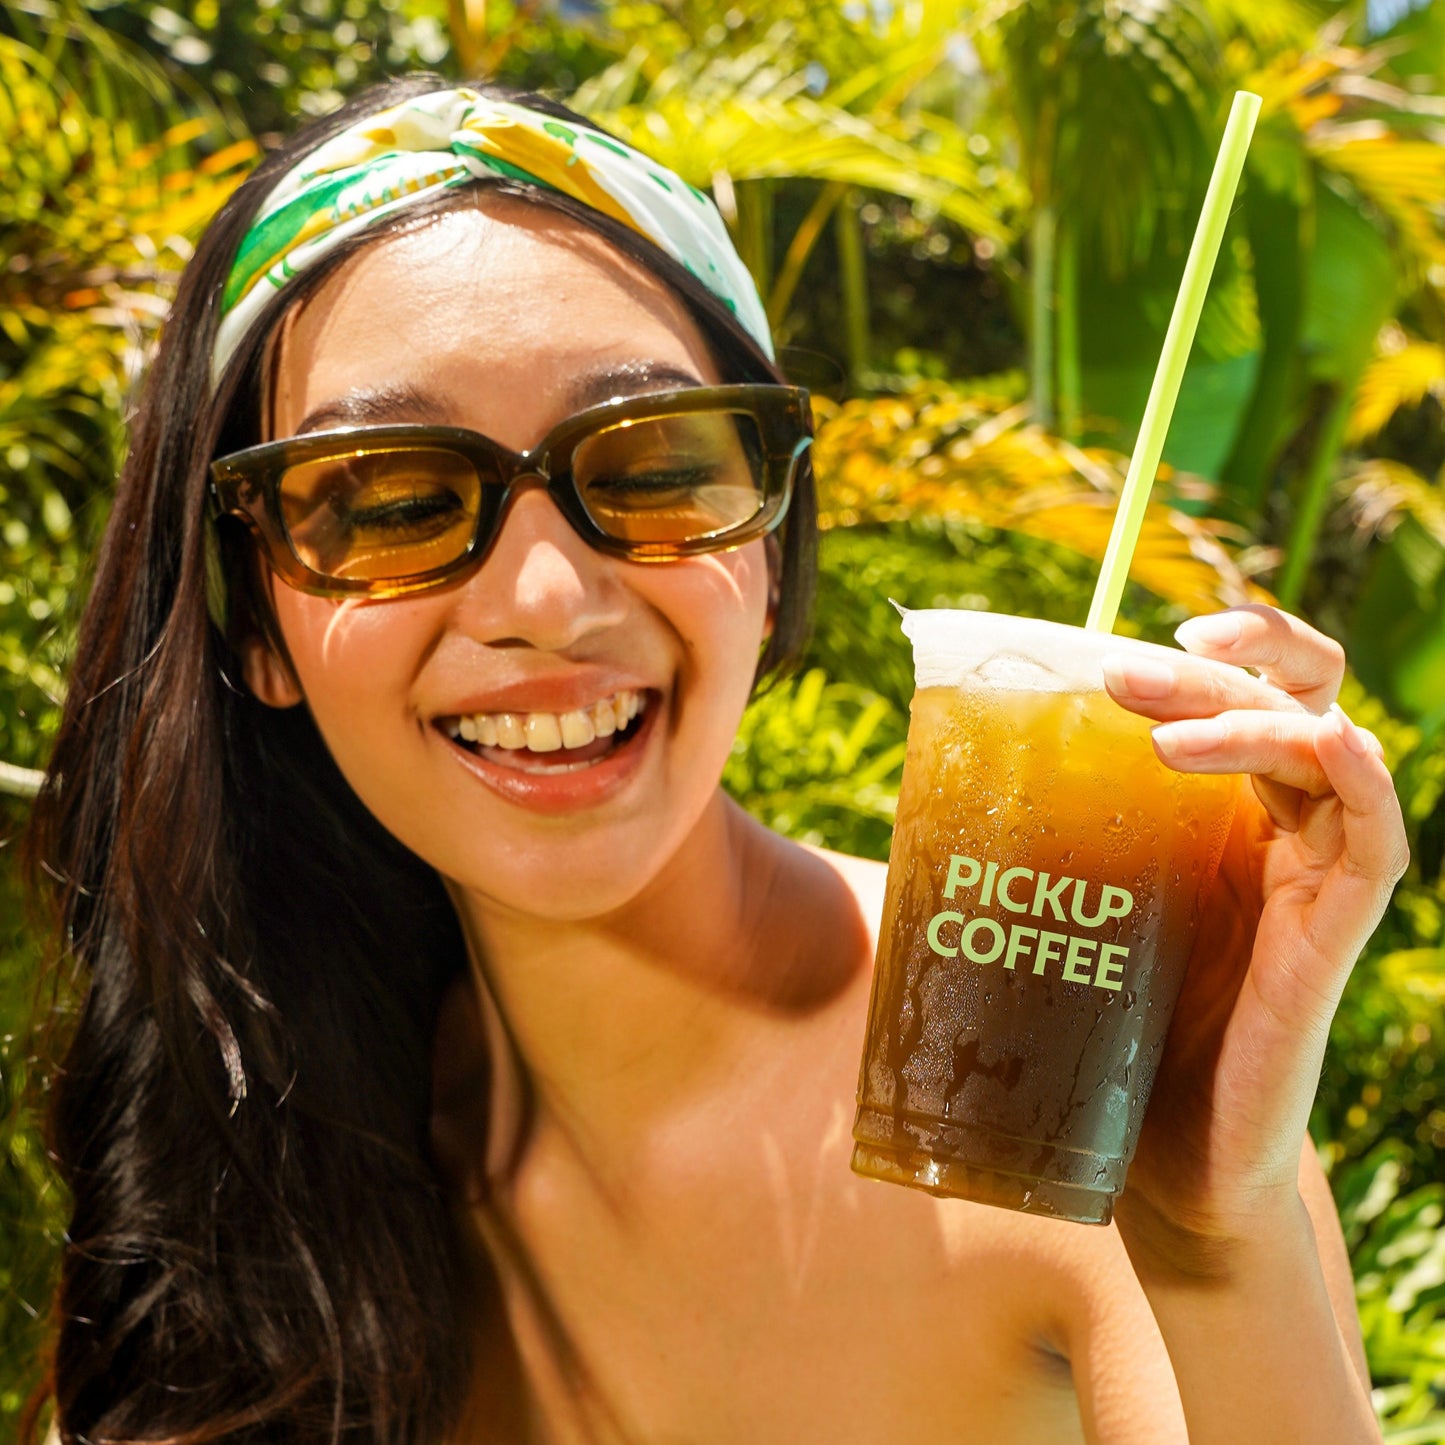 REED Pickle Sunglasses + PICKUP COFFEE Voucher